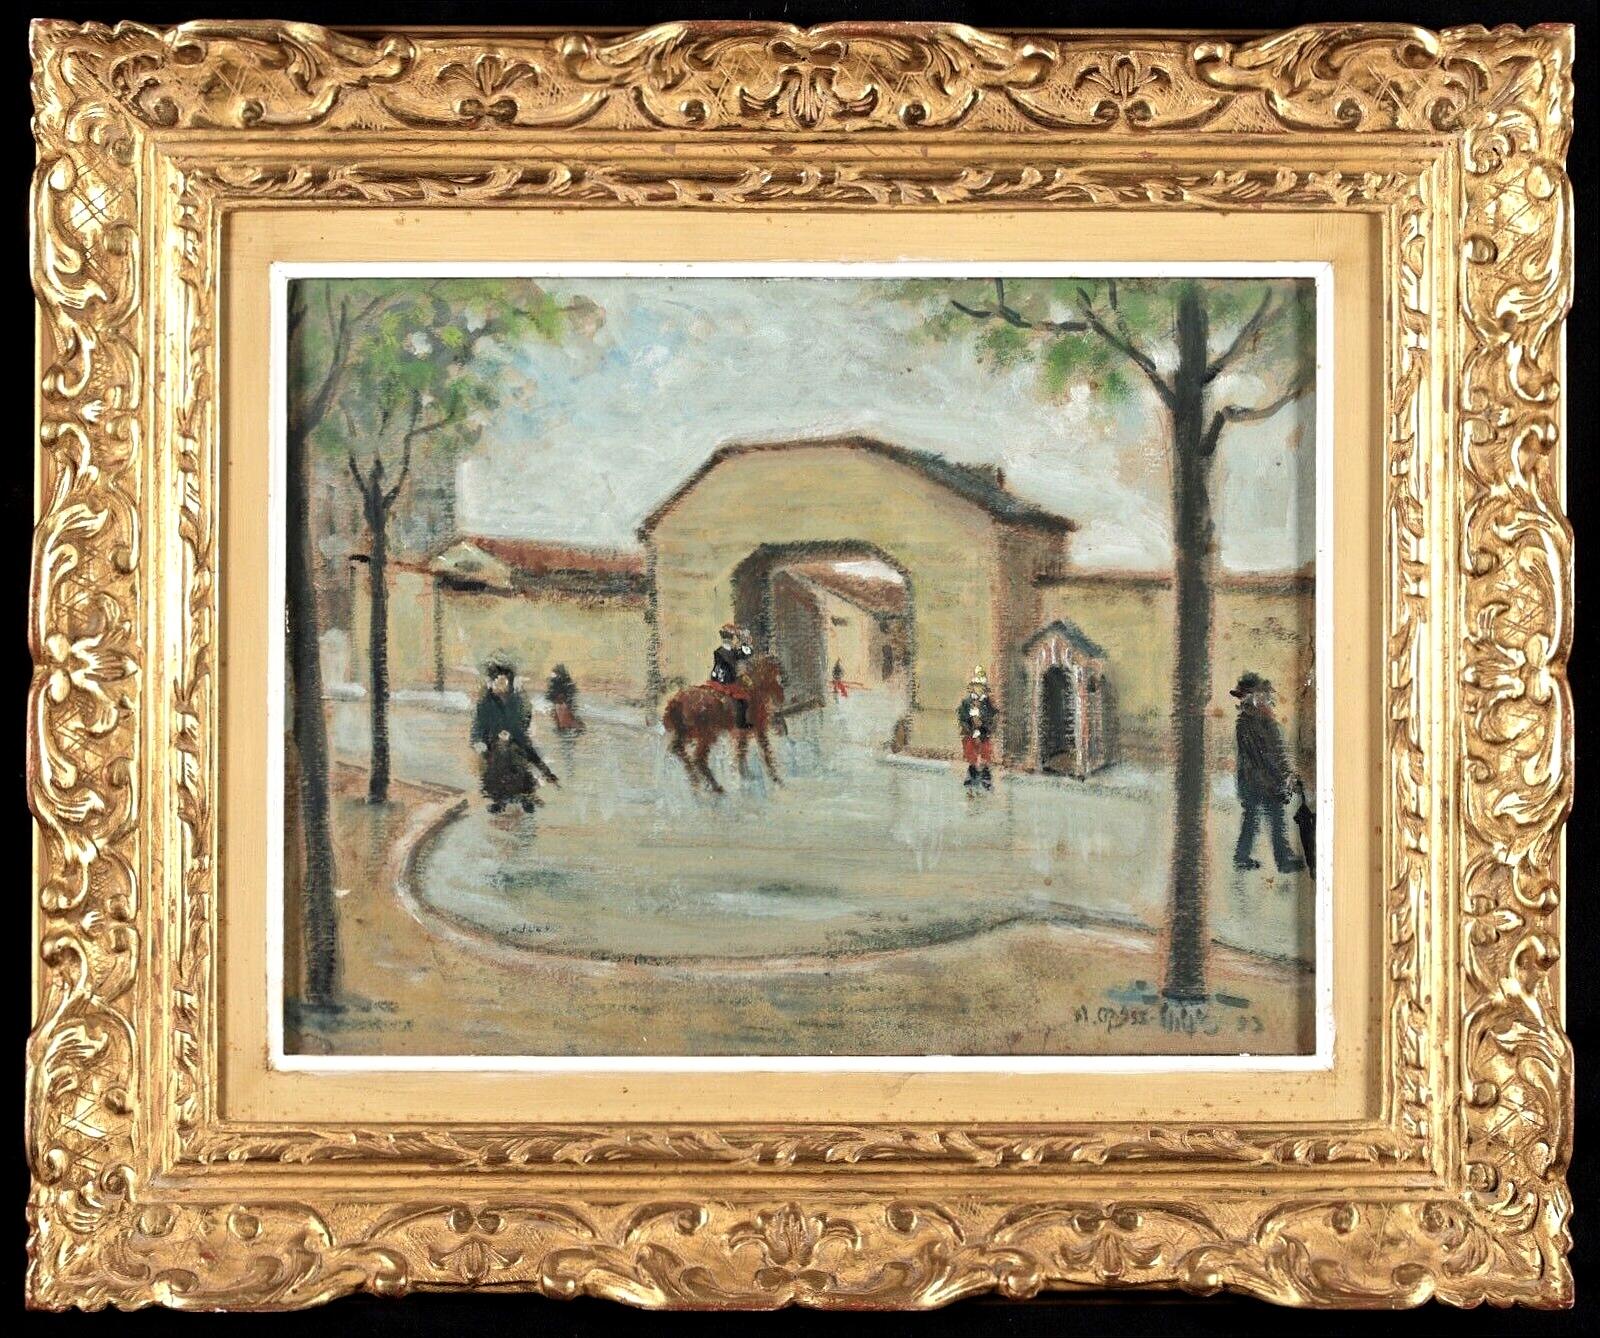 Grenelle, Paris - 19th Century French Impressionist Antique Oil Painting